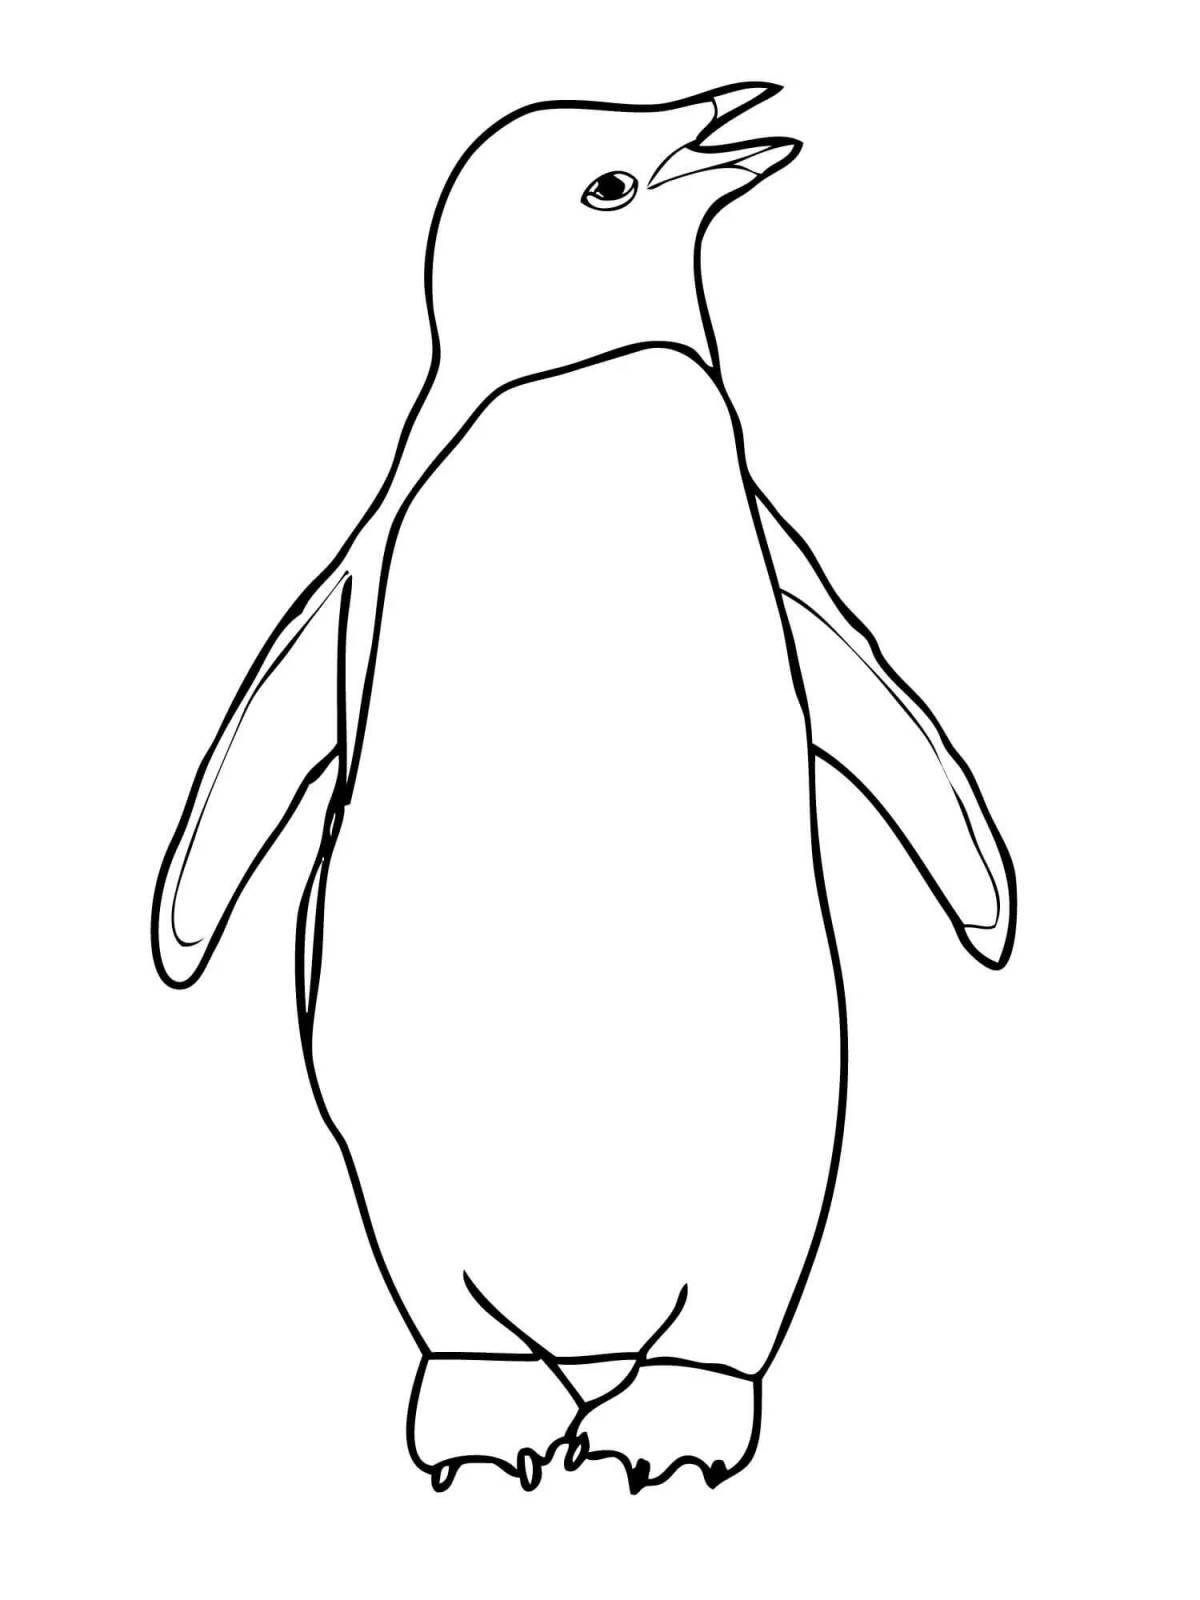 Penguin coloring page with color explosion pattern